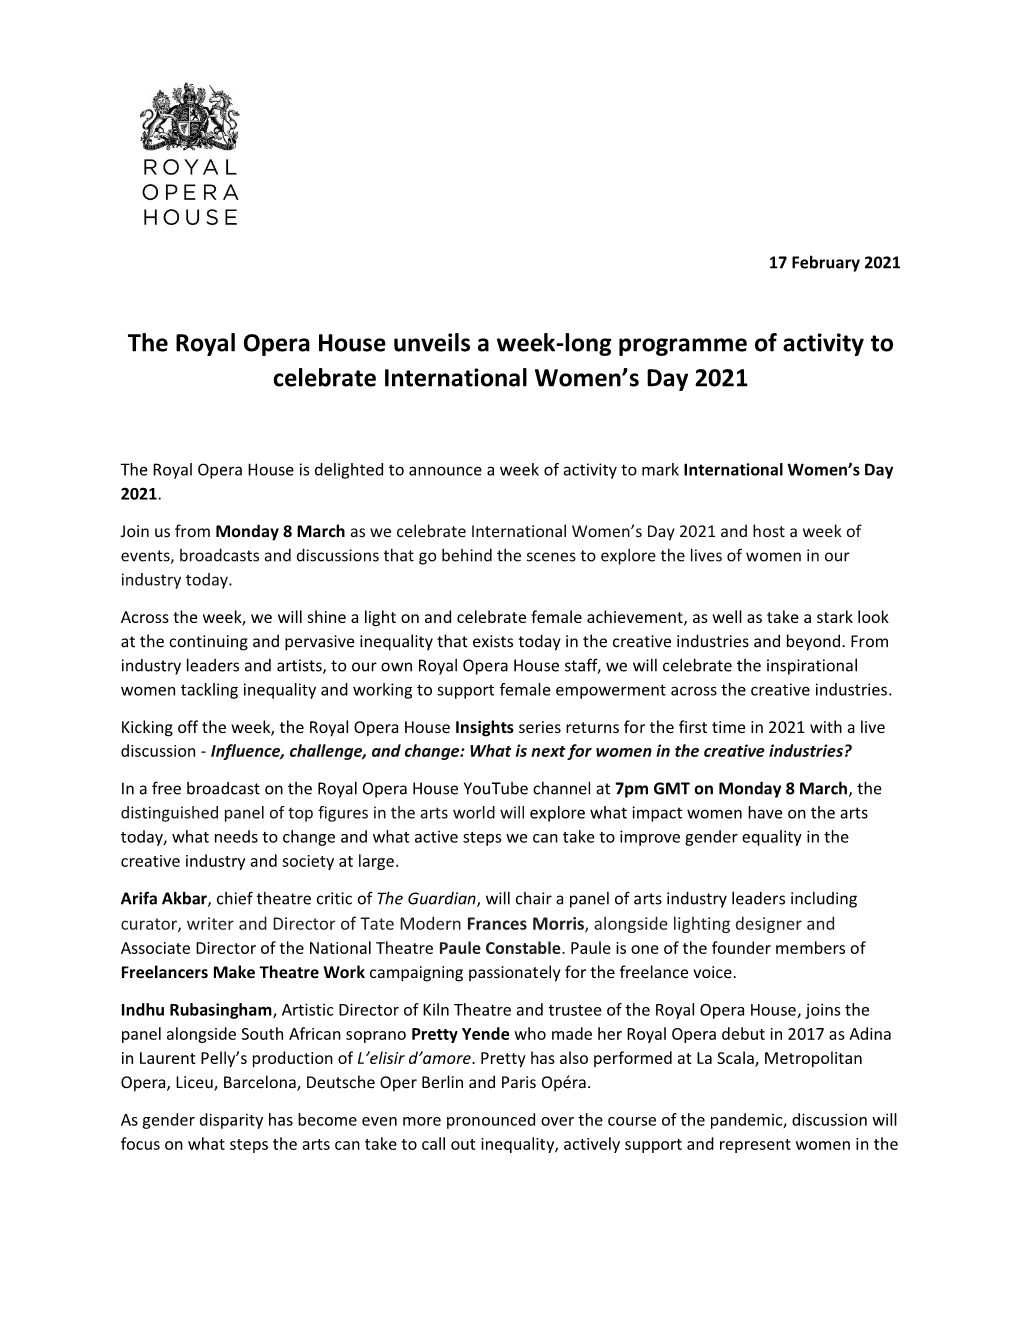 The Royal Opera House Unveils a Week-Long Programme of Activity to Celebrate International Women's Day 2021